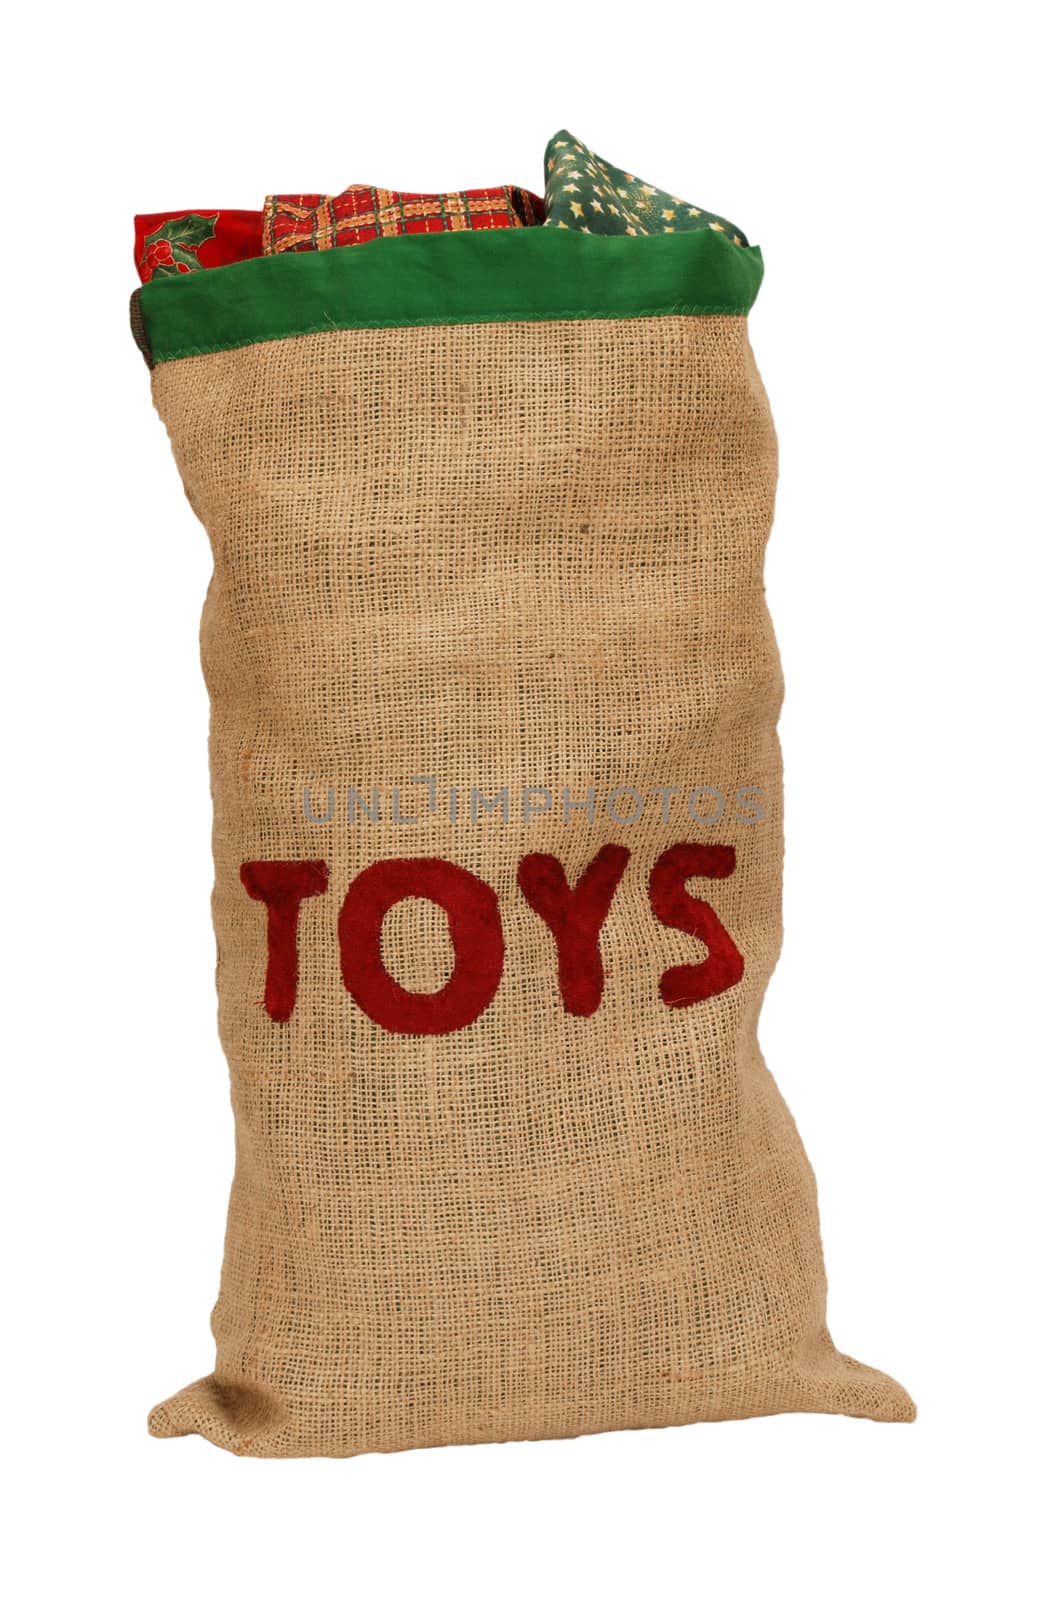 Hessian toy sack stuffed full with Christmas presents, isolated on a white background